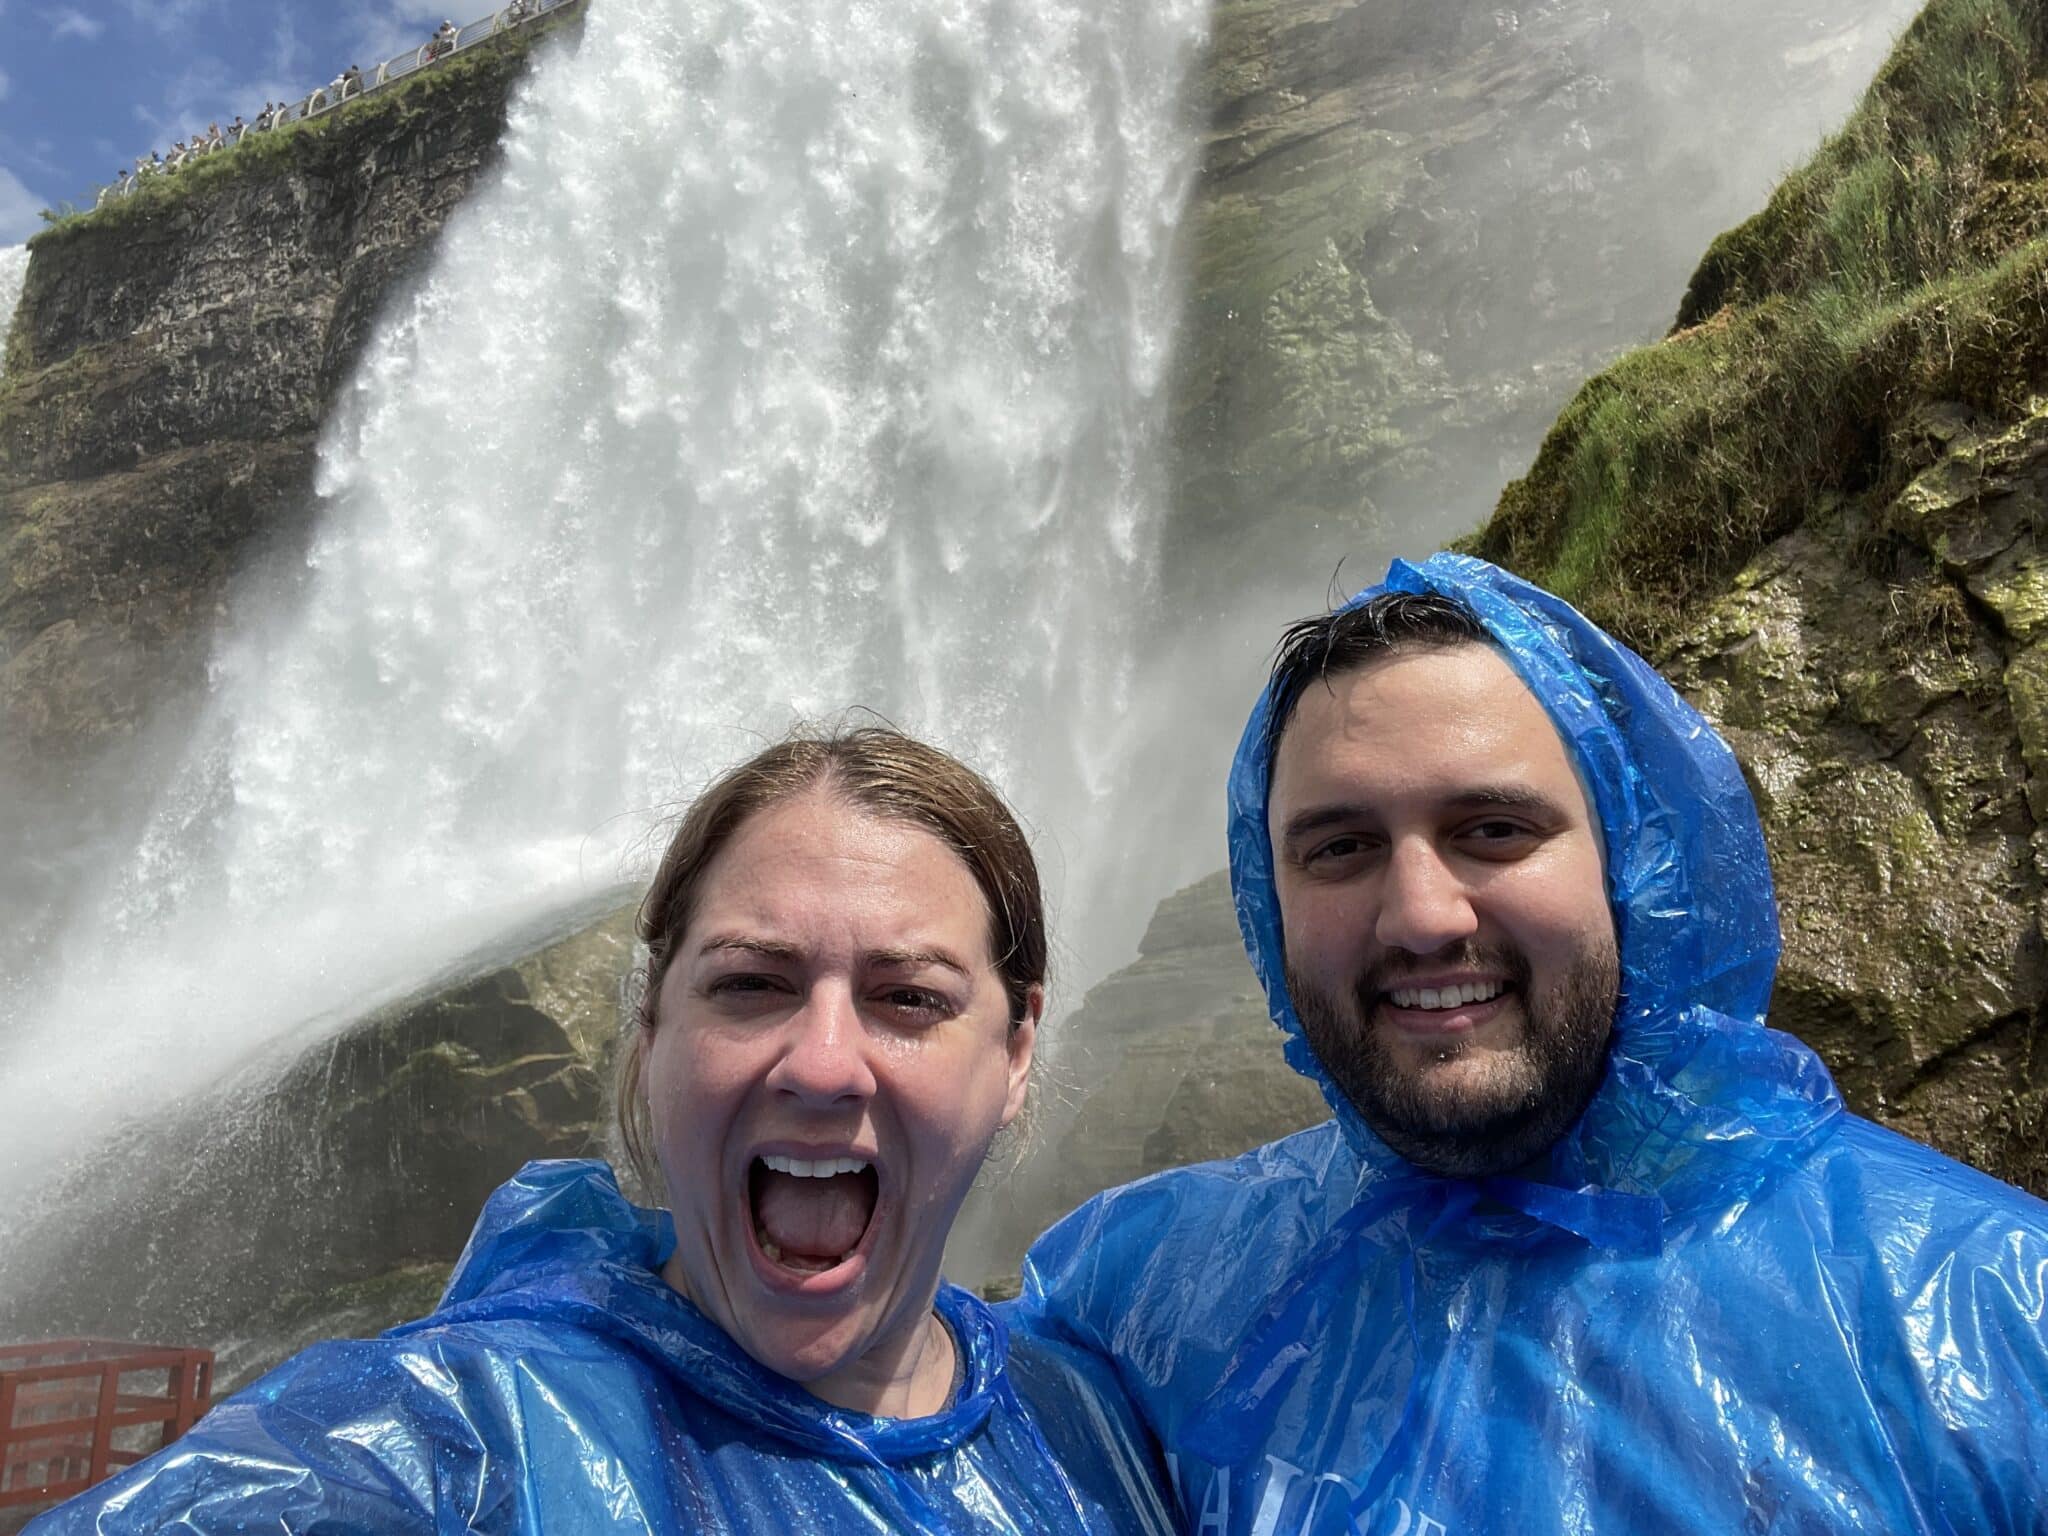 man and woman looking at camera man smiling and woman with mouth open in surprise with big waterfall behind them as they wear blue ponchos